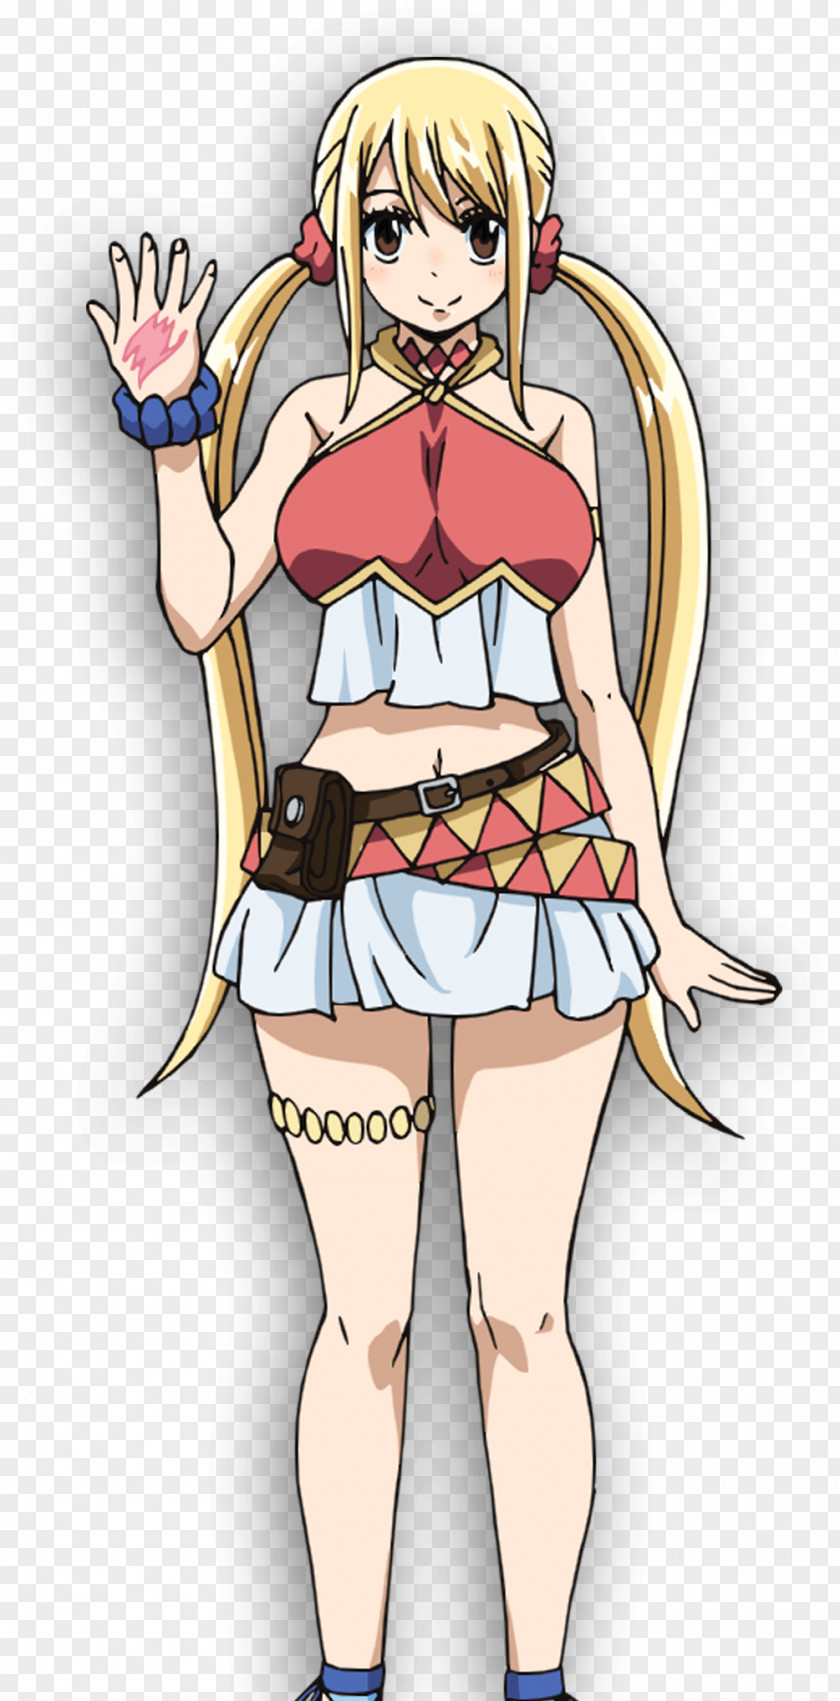 Fairy Tail Natsu Dragneel Wendy Marvell Film Trailer PNG